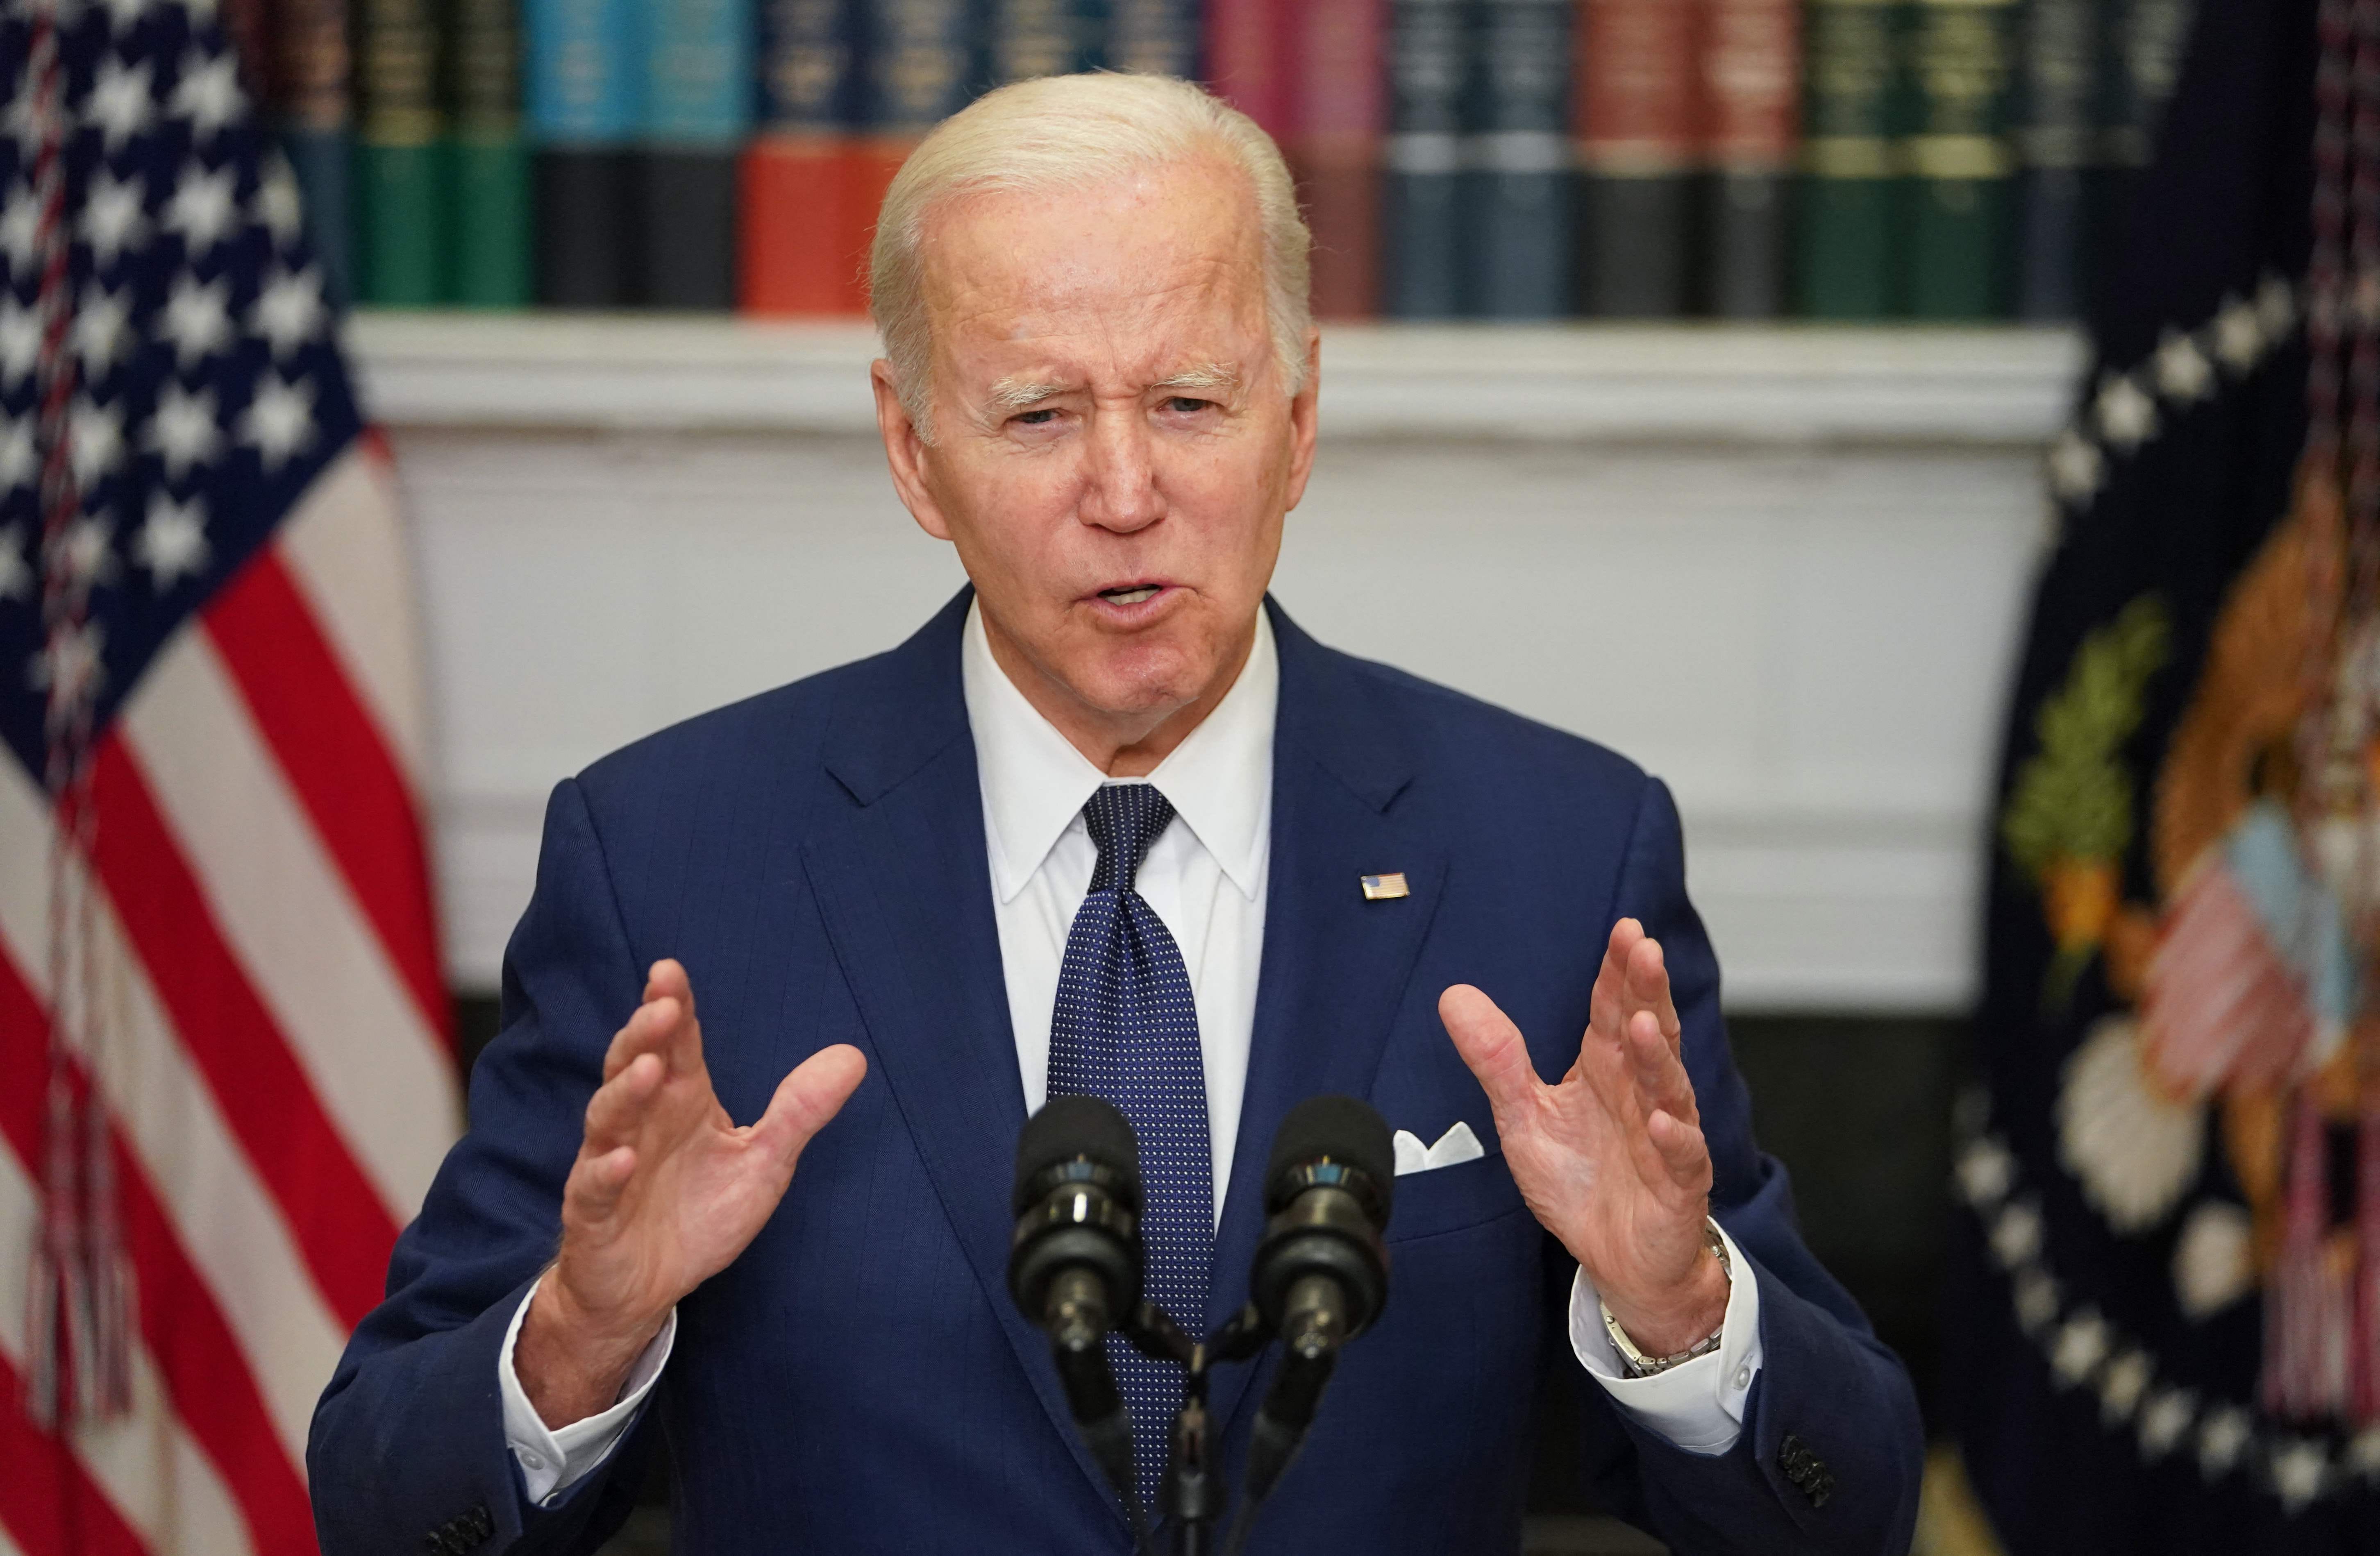 President Joe Biden delivers remarks in the Roosevelt Room of the White House in Washington on Tuesday after a gunman shot dead 19 children and two teachers at an elementary school in Texas.